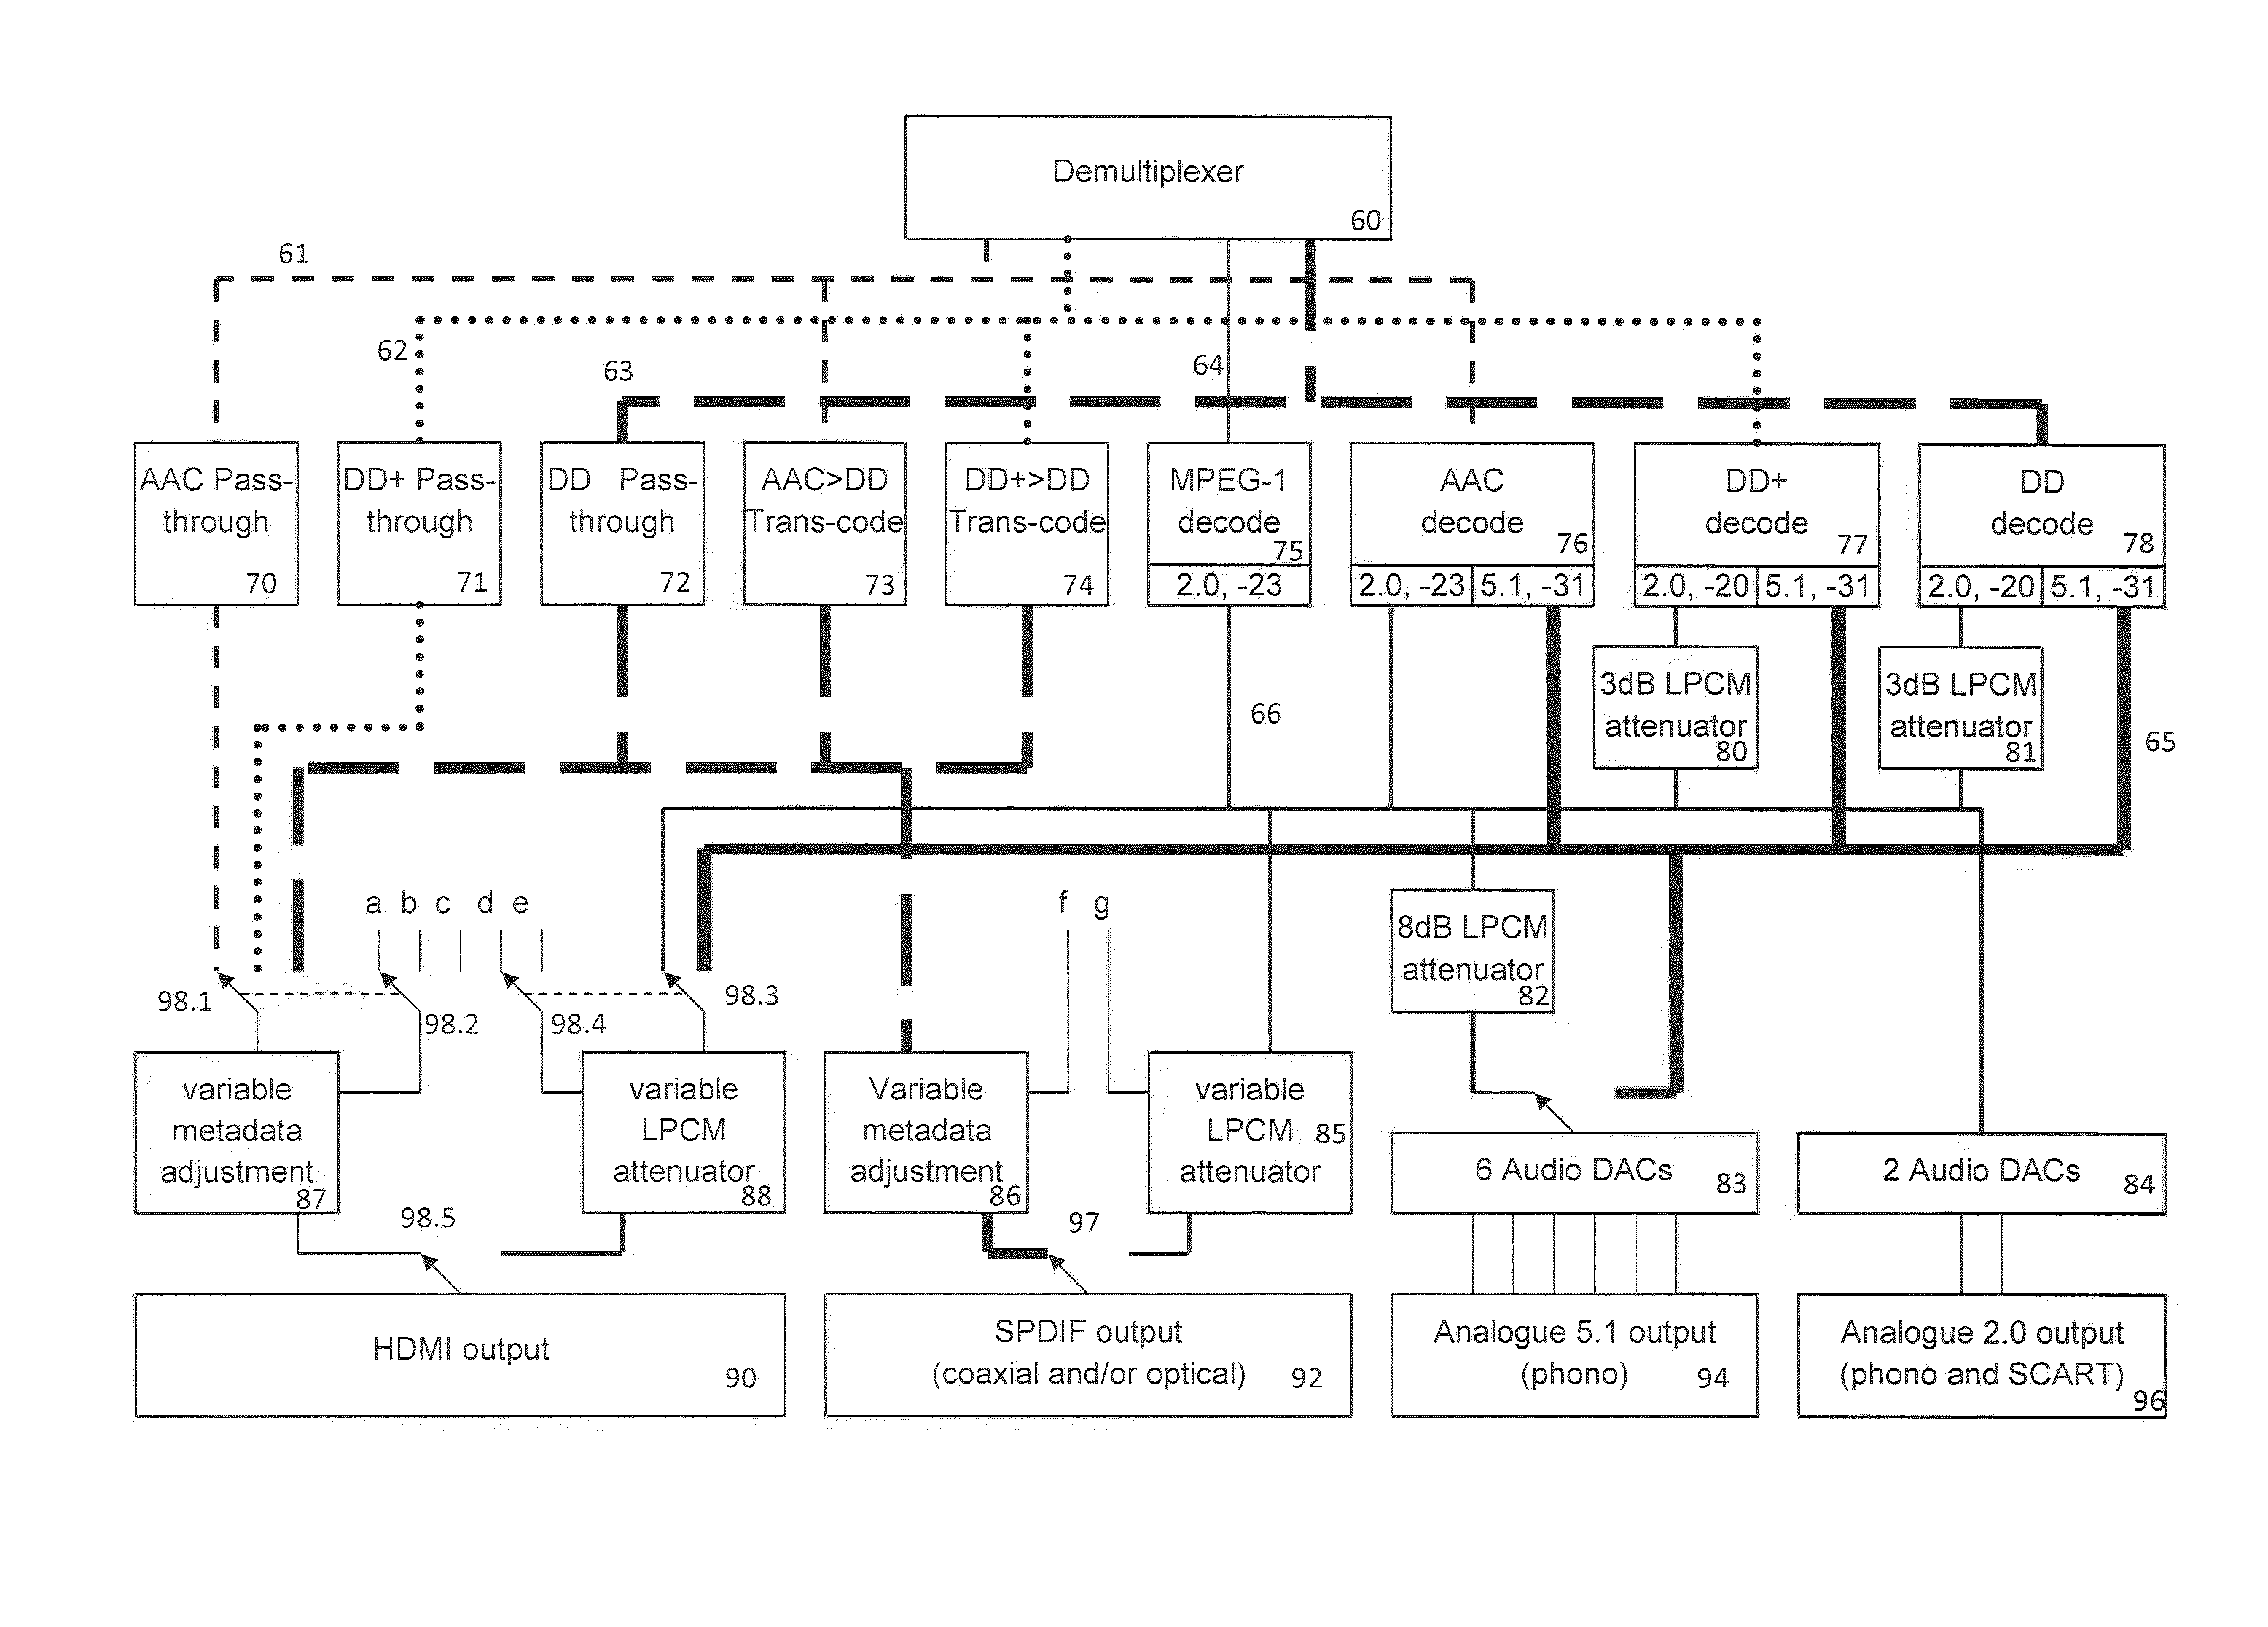 Loudness level control for audio reception and decoding equipment